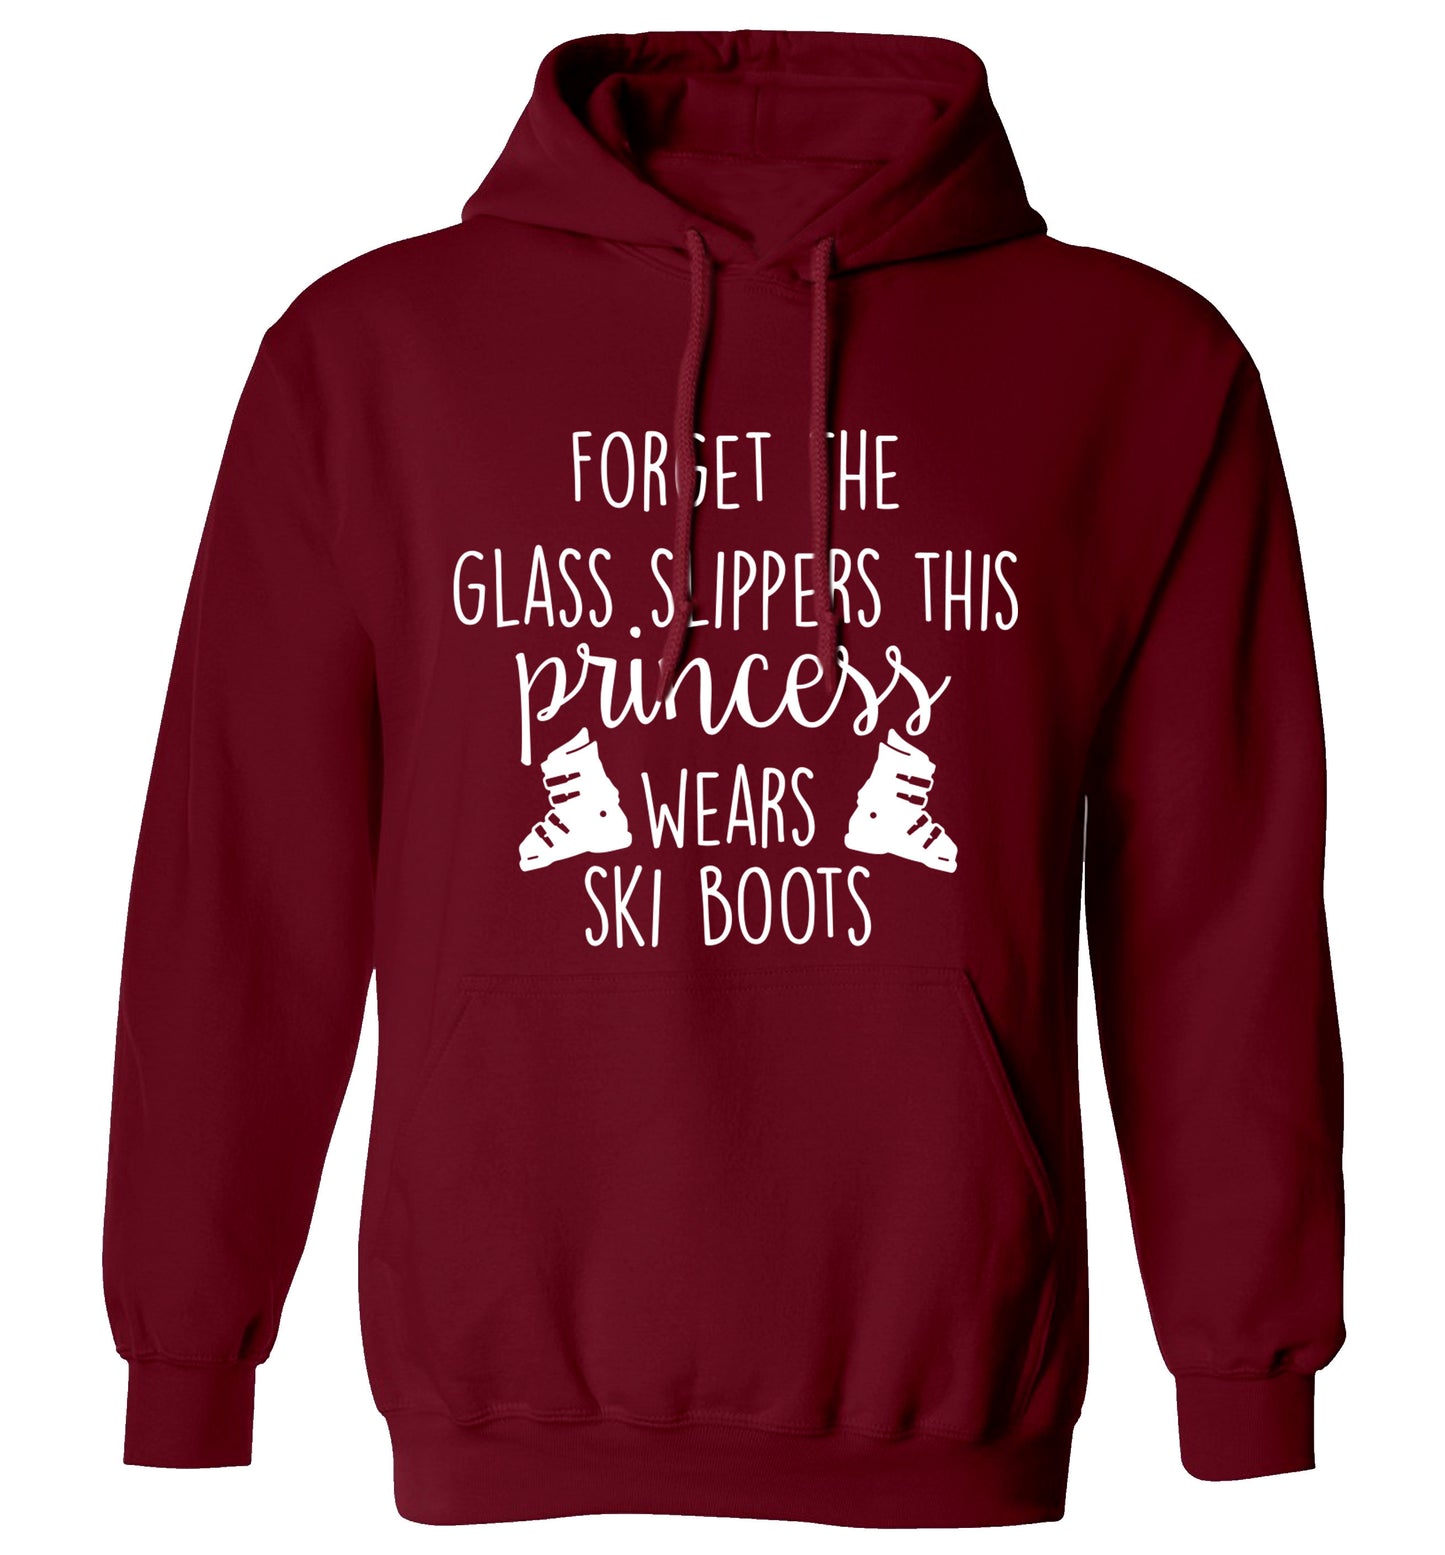 Forget the glass slippers this princess wears ski boots adults unisex maroon hoodie 2XL